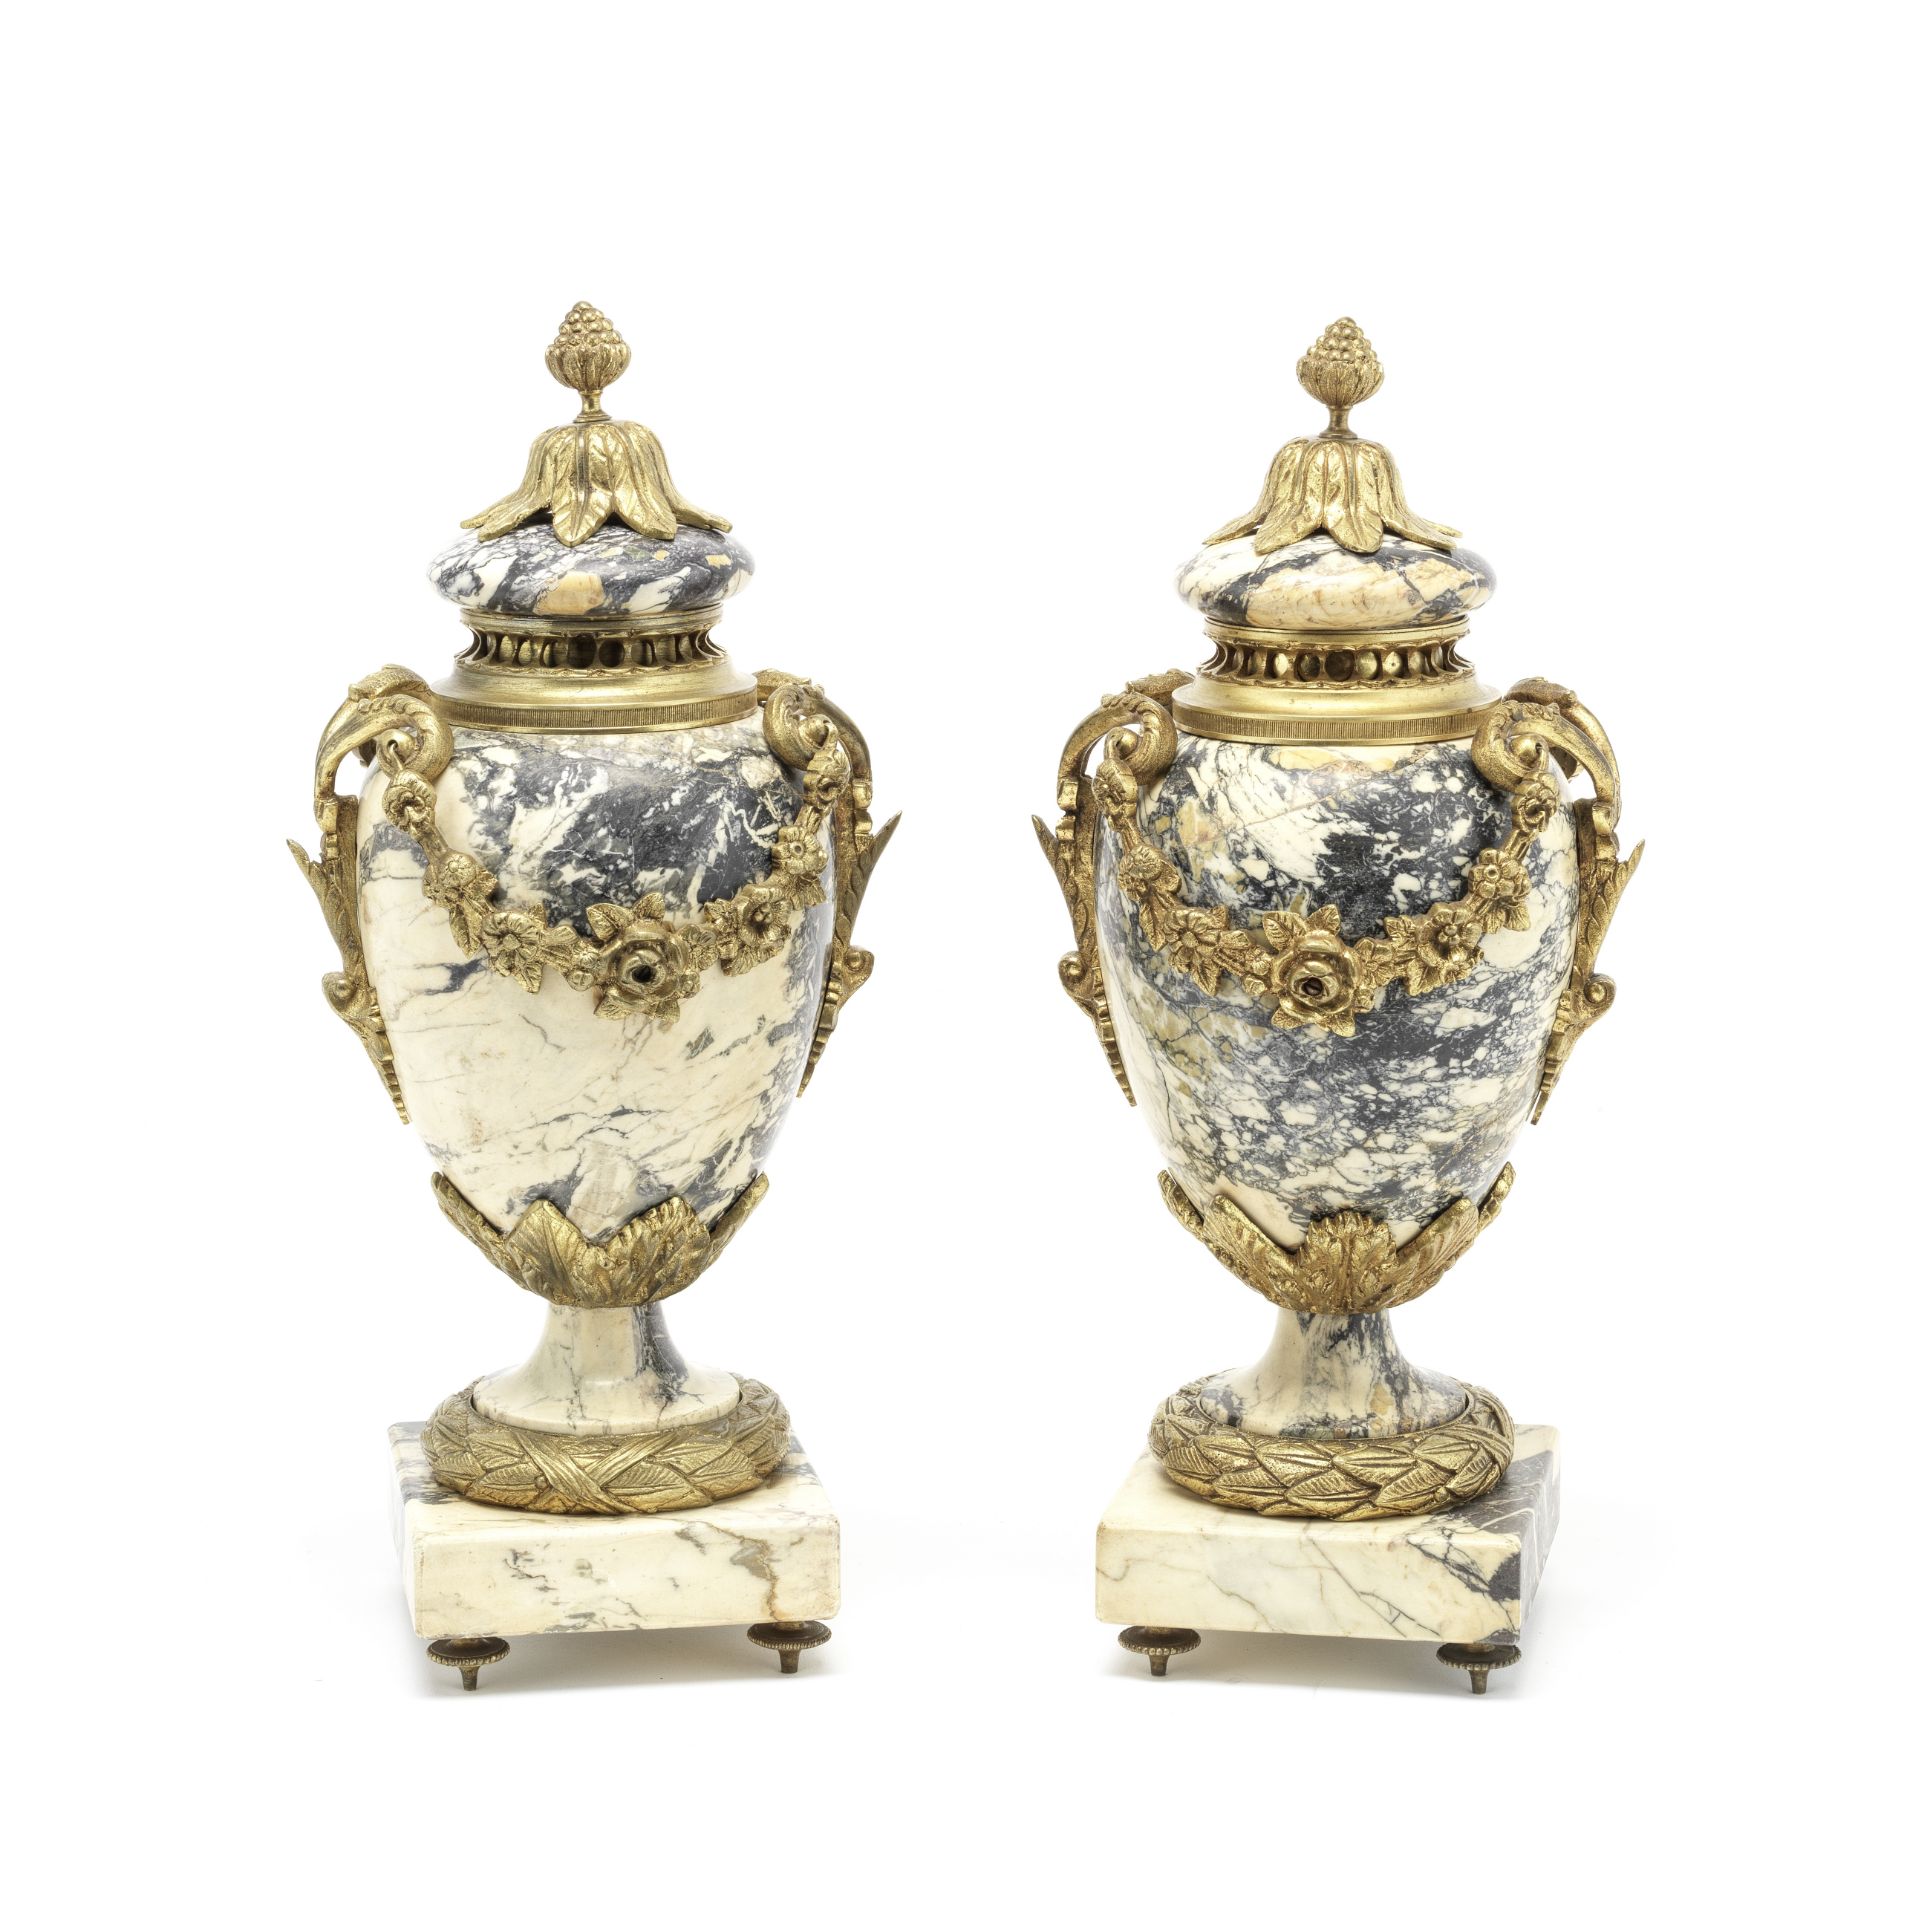 A pair of gilt bronze mounted beige veined marble garniture urns in the Louis XVI style, probabl...